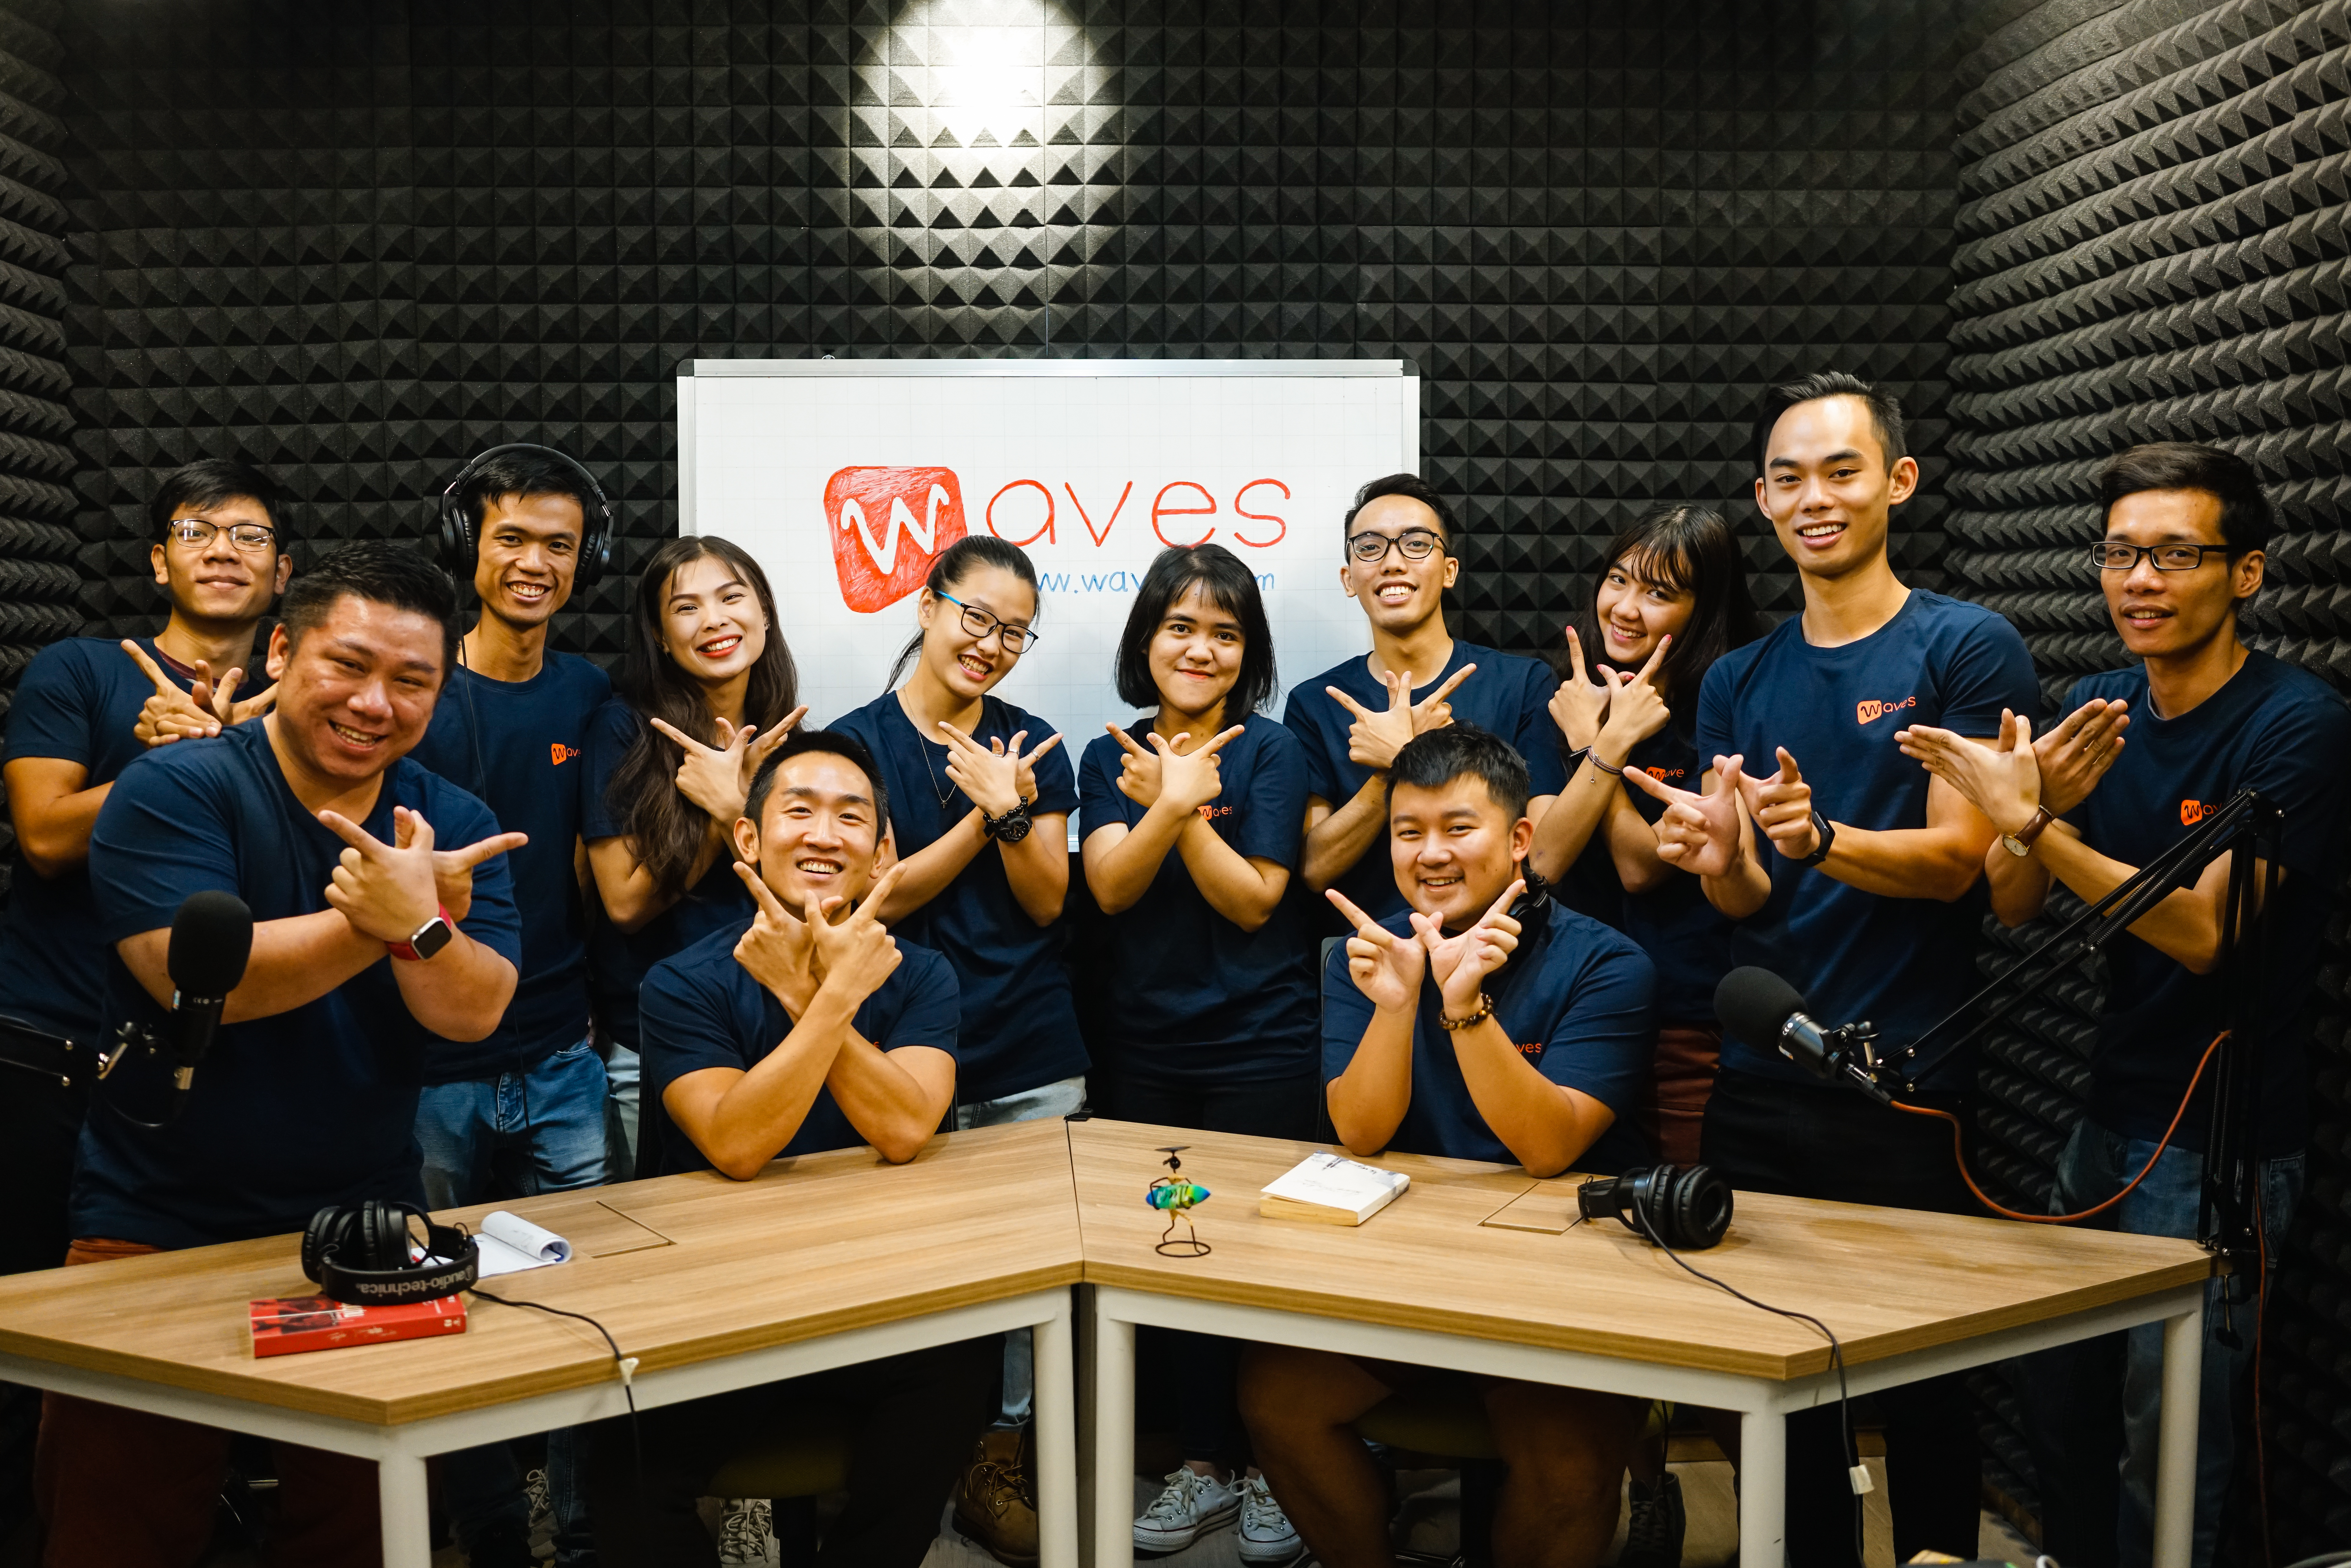 Vietnamese audio and podcast startup Waves receives USD 1.2 million seed funding led by Insignia Ventures